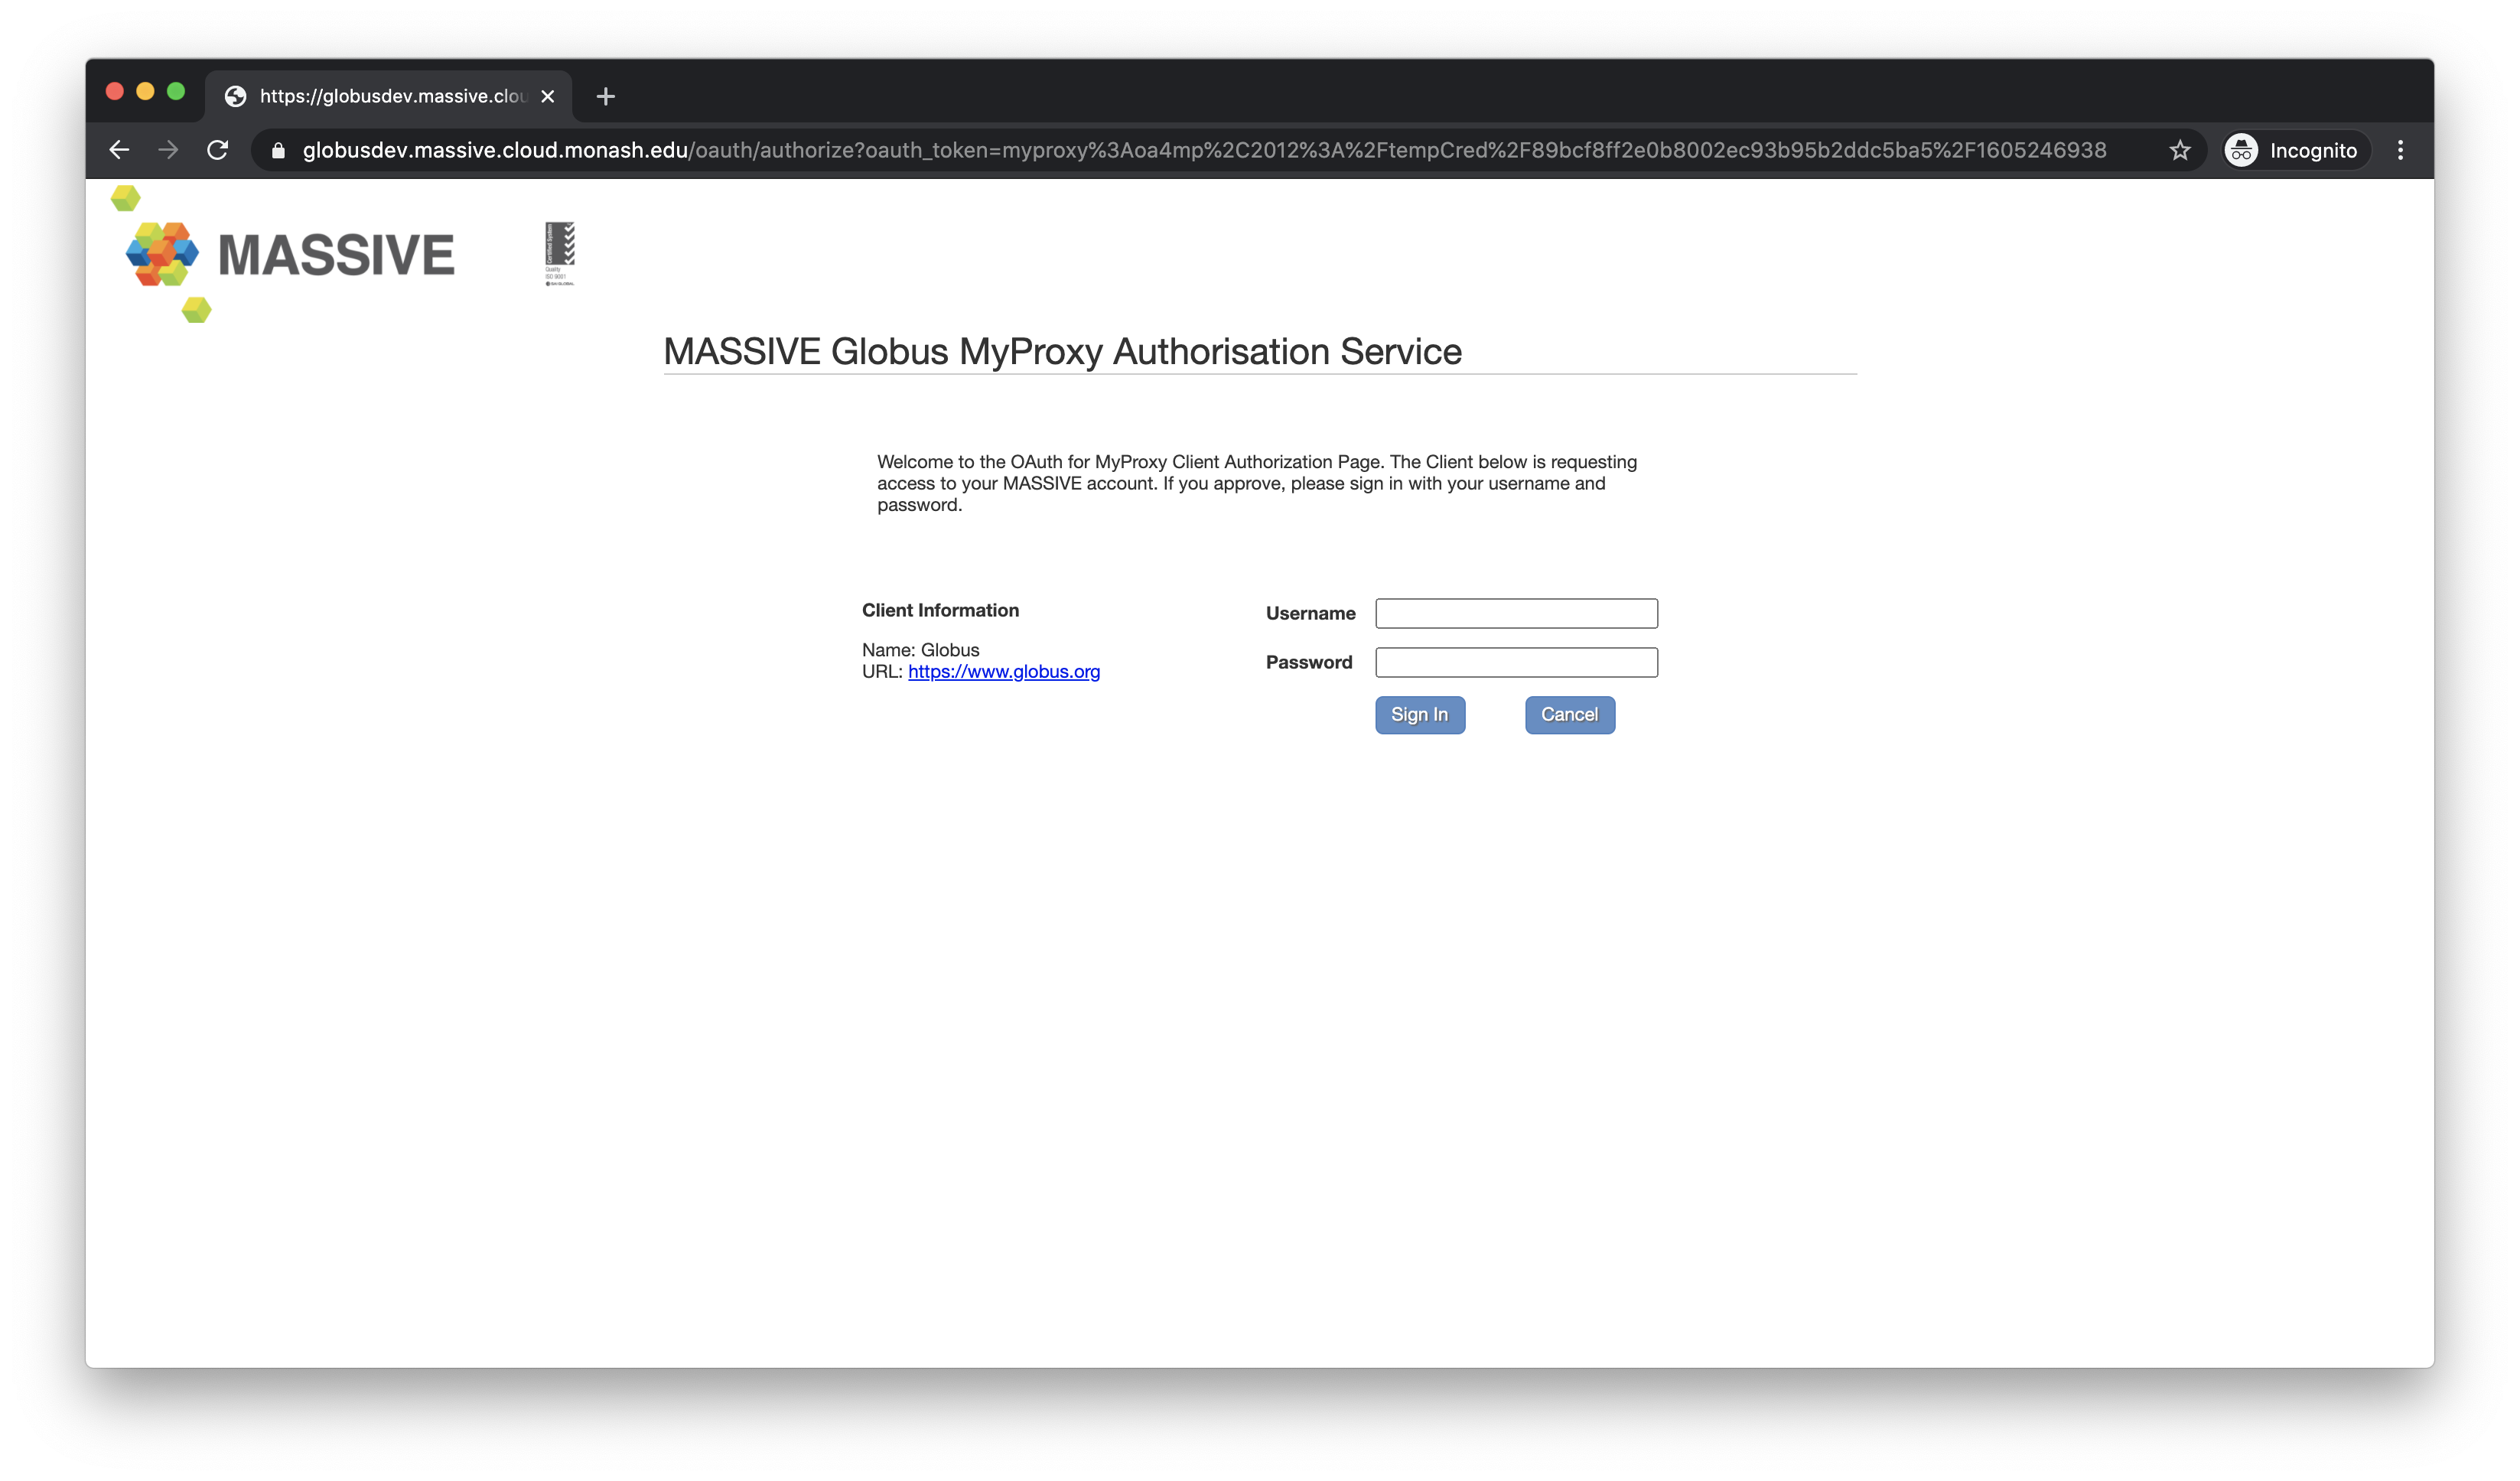 ../_images/globus-myproxy-oauth-massive.png